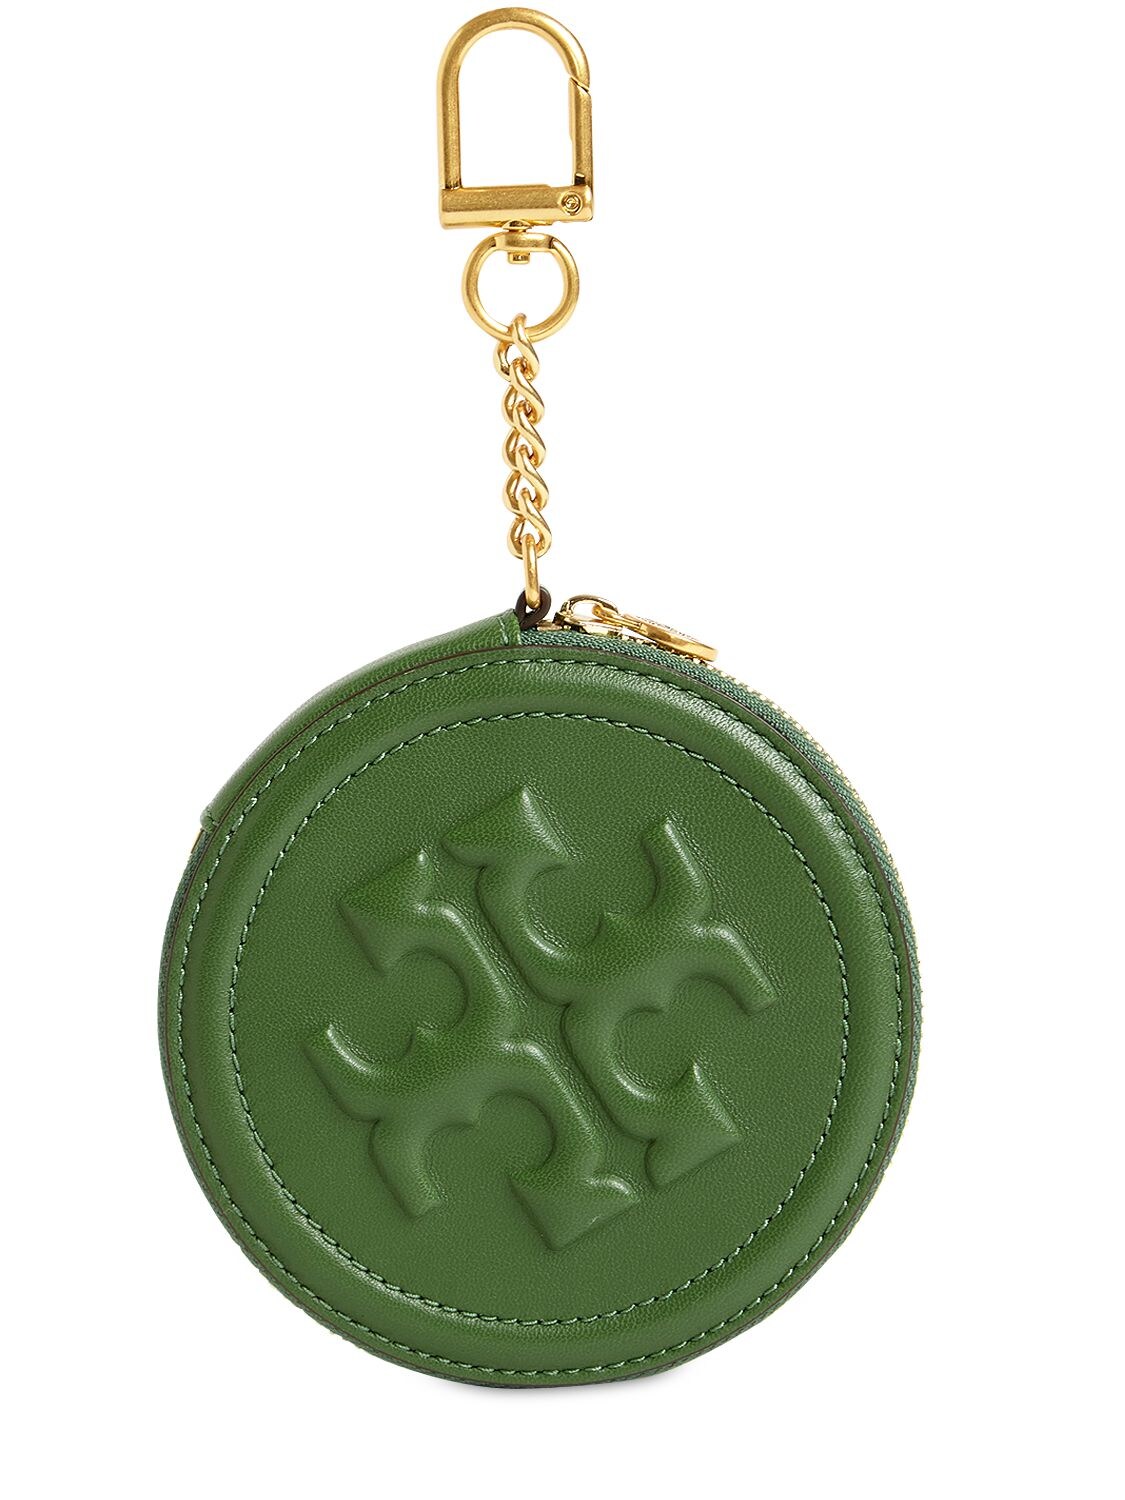 Tory Burch Flaming Leather Coin Purse 